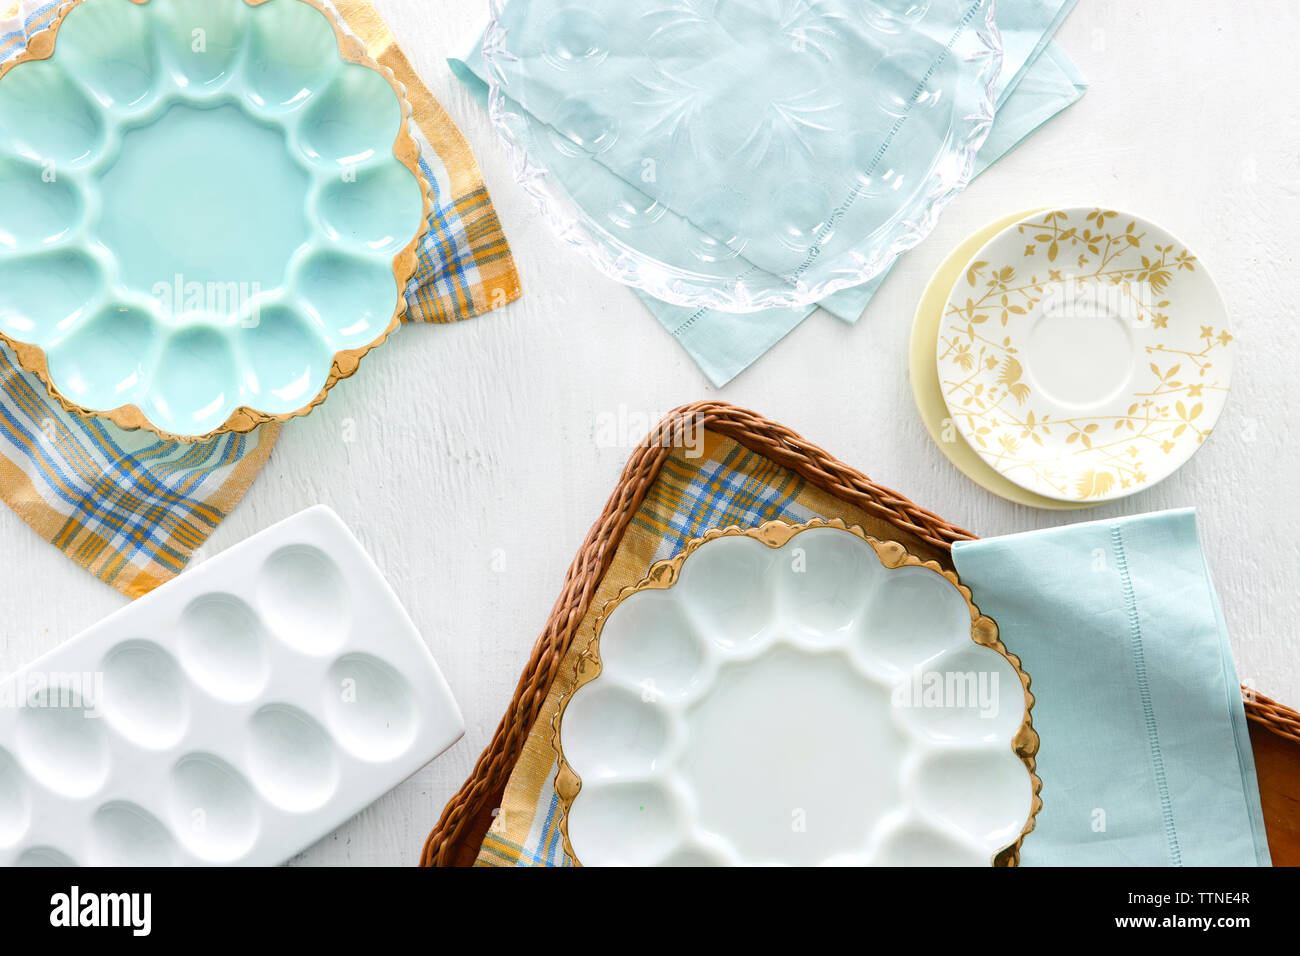 High angle view of egg shaped empty plates with napkins and tray on table at home Stock Photo